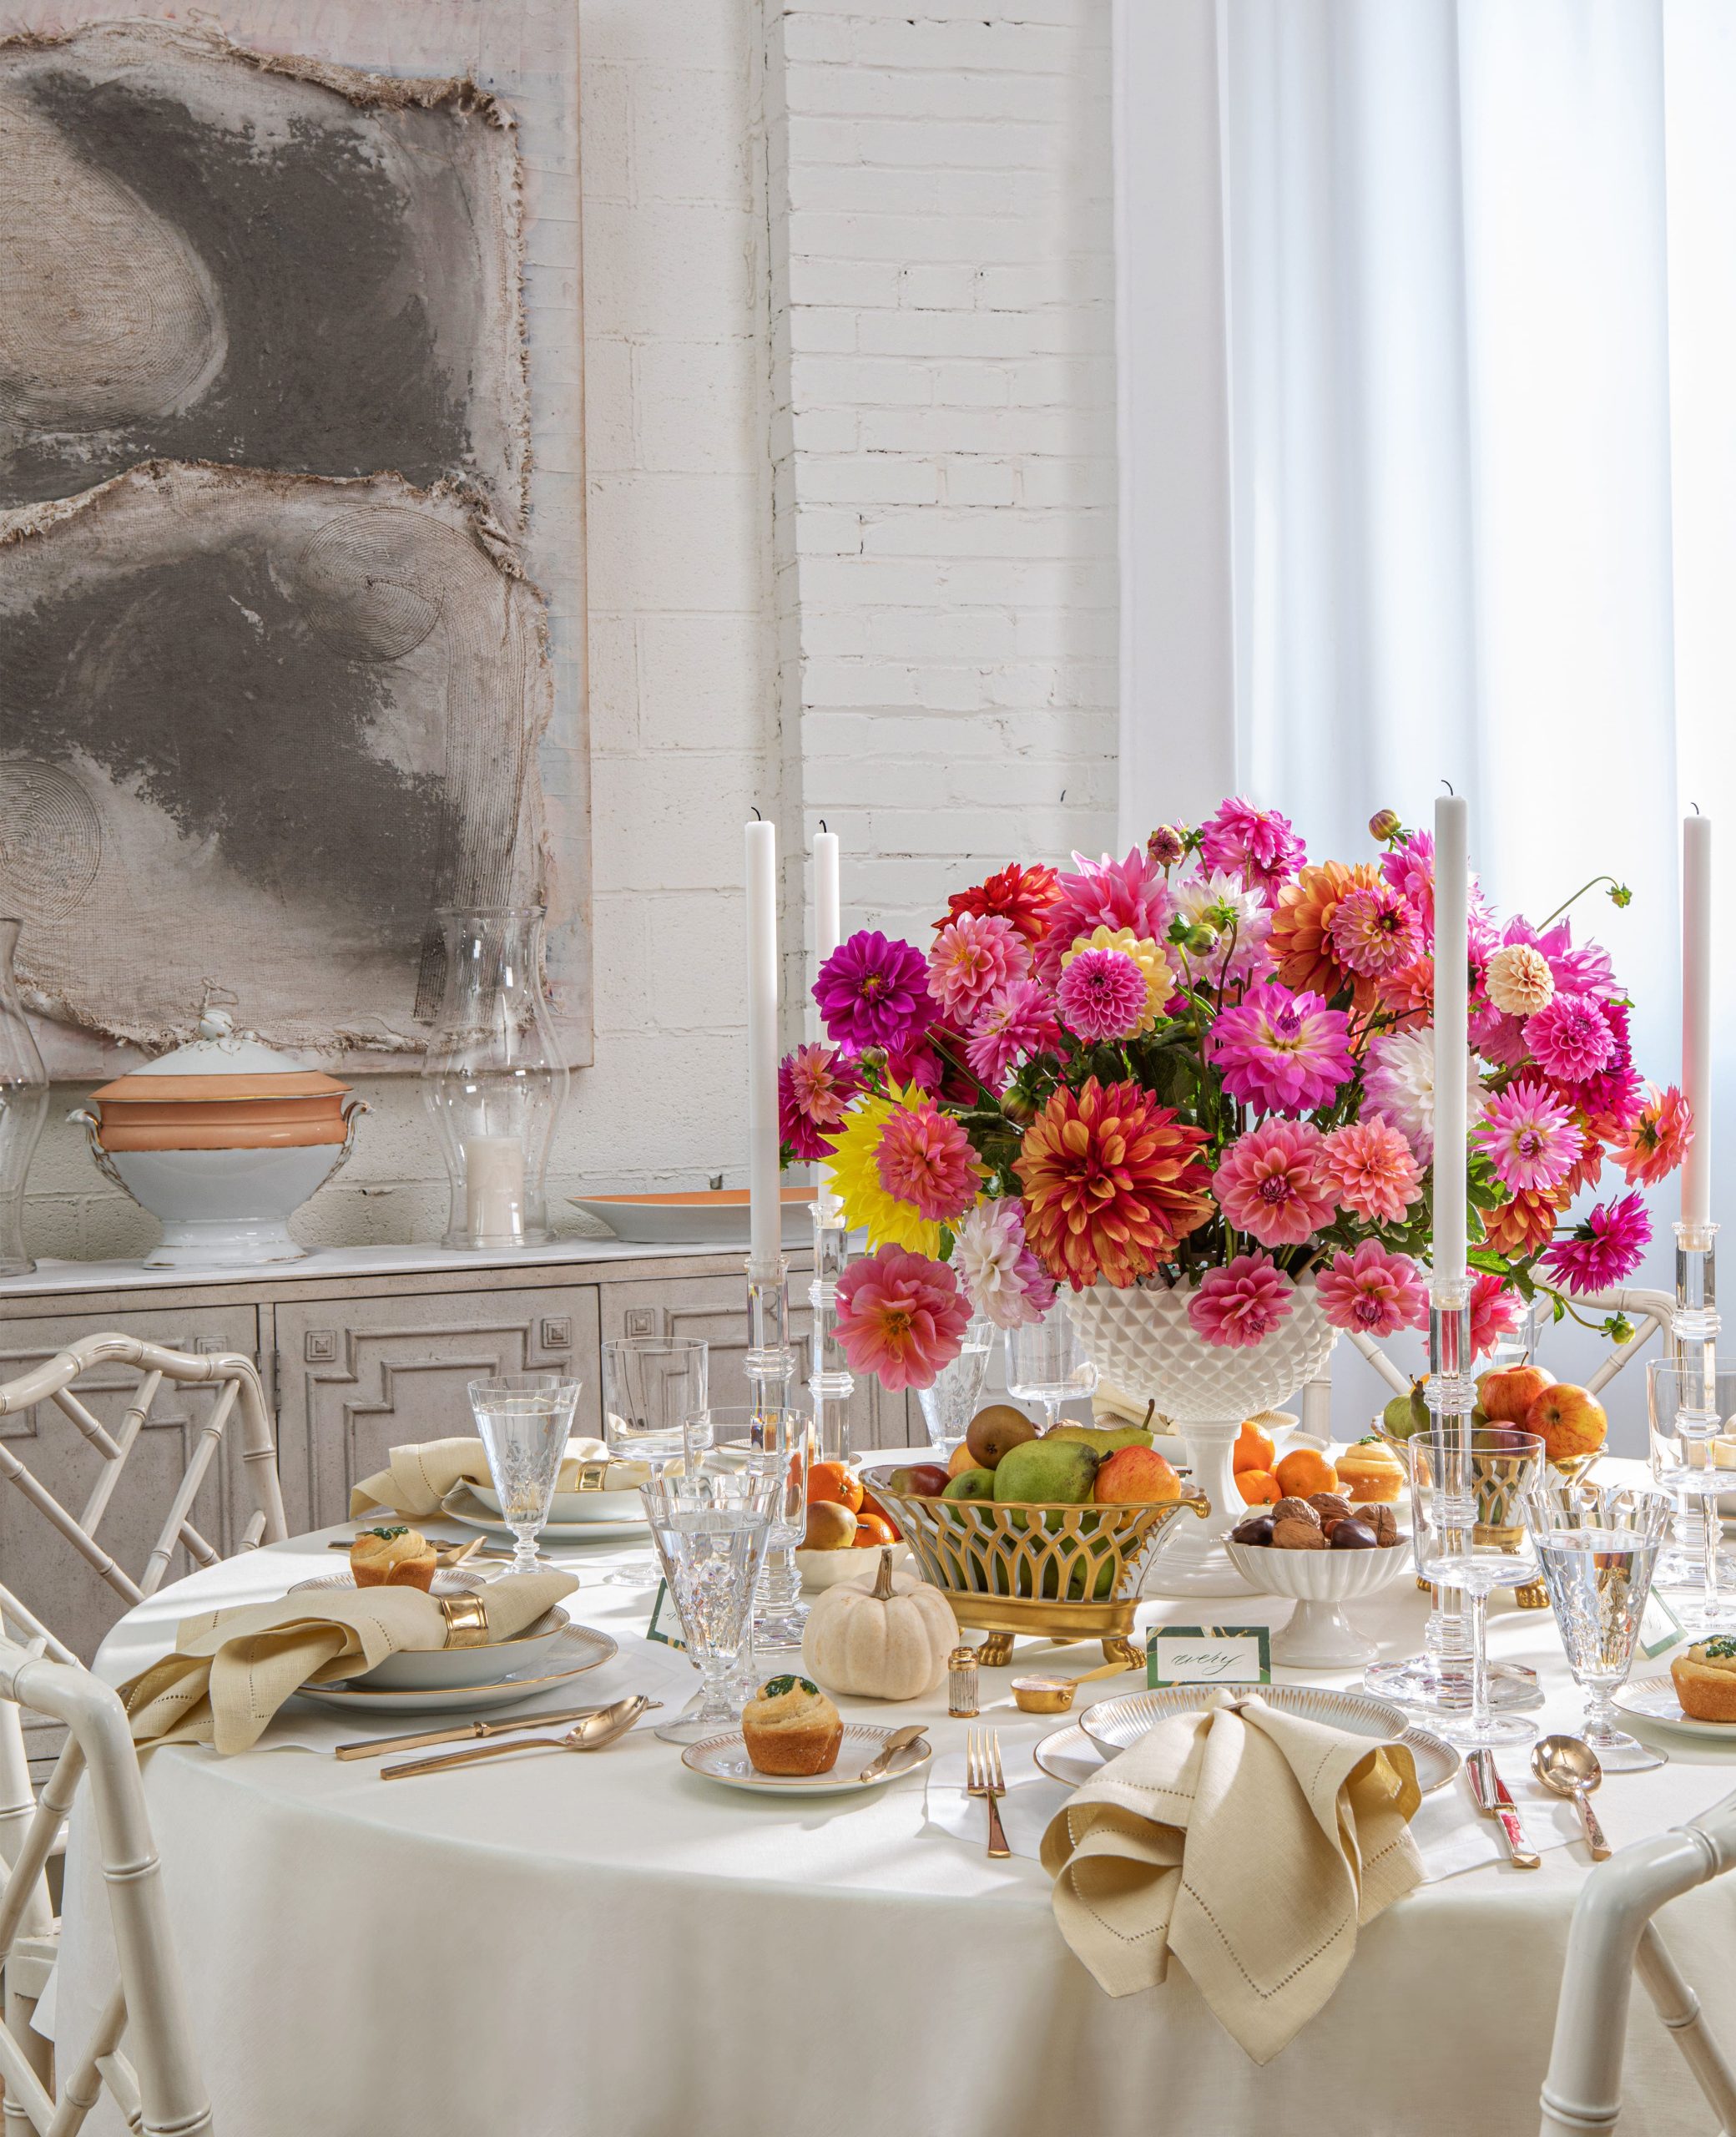 Dining room setup in our Loft studio with brightly colored floral centerpiece